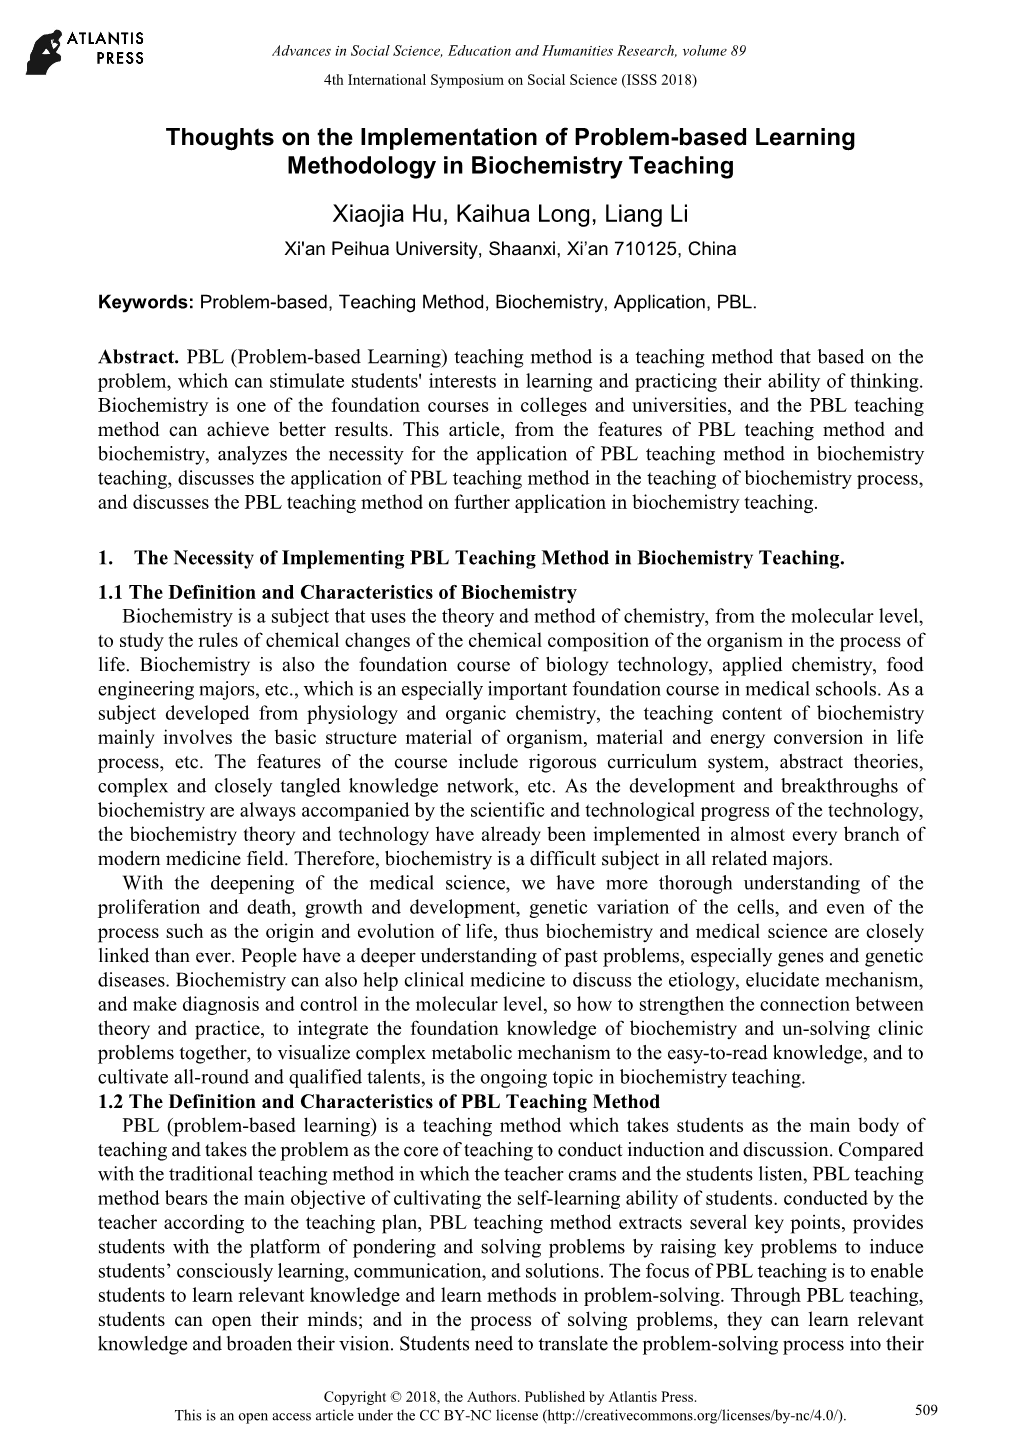 Thoughts on the Implementation of Problem-Based Learning Methodology in Biochemistry Teaching